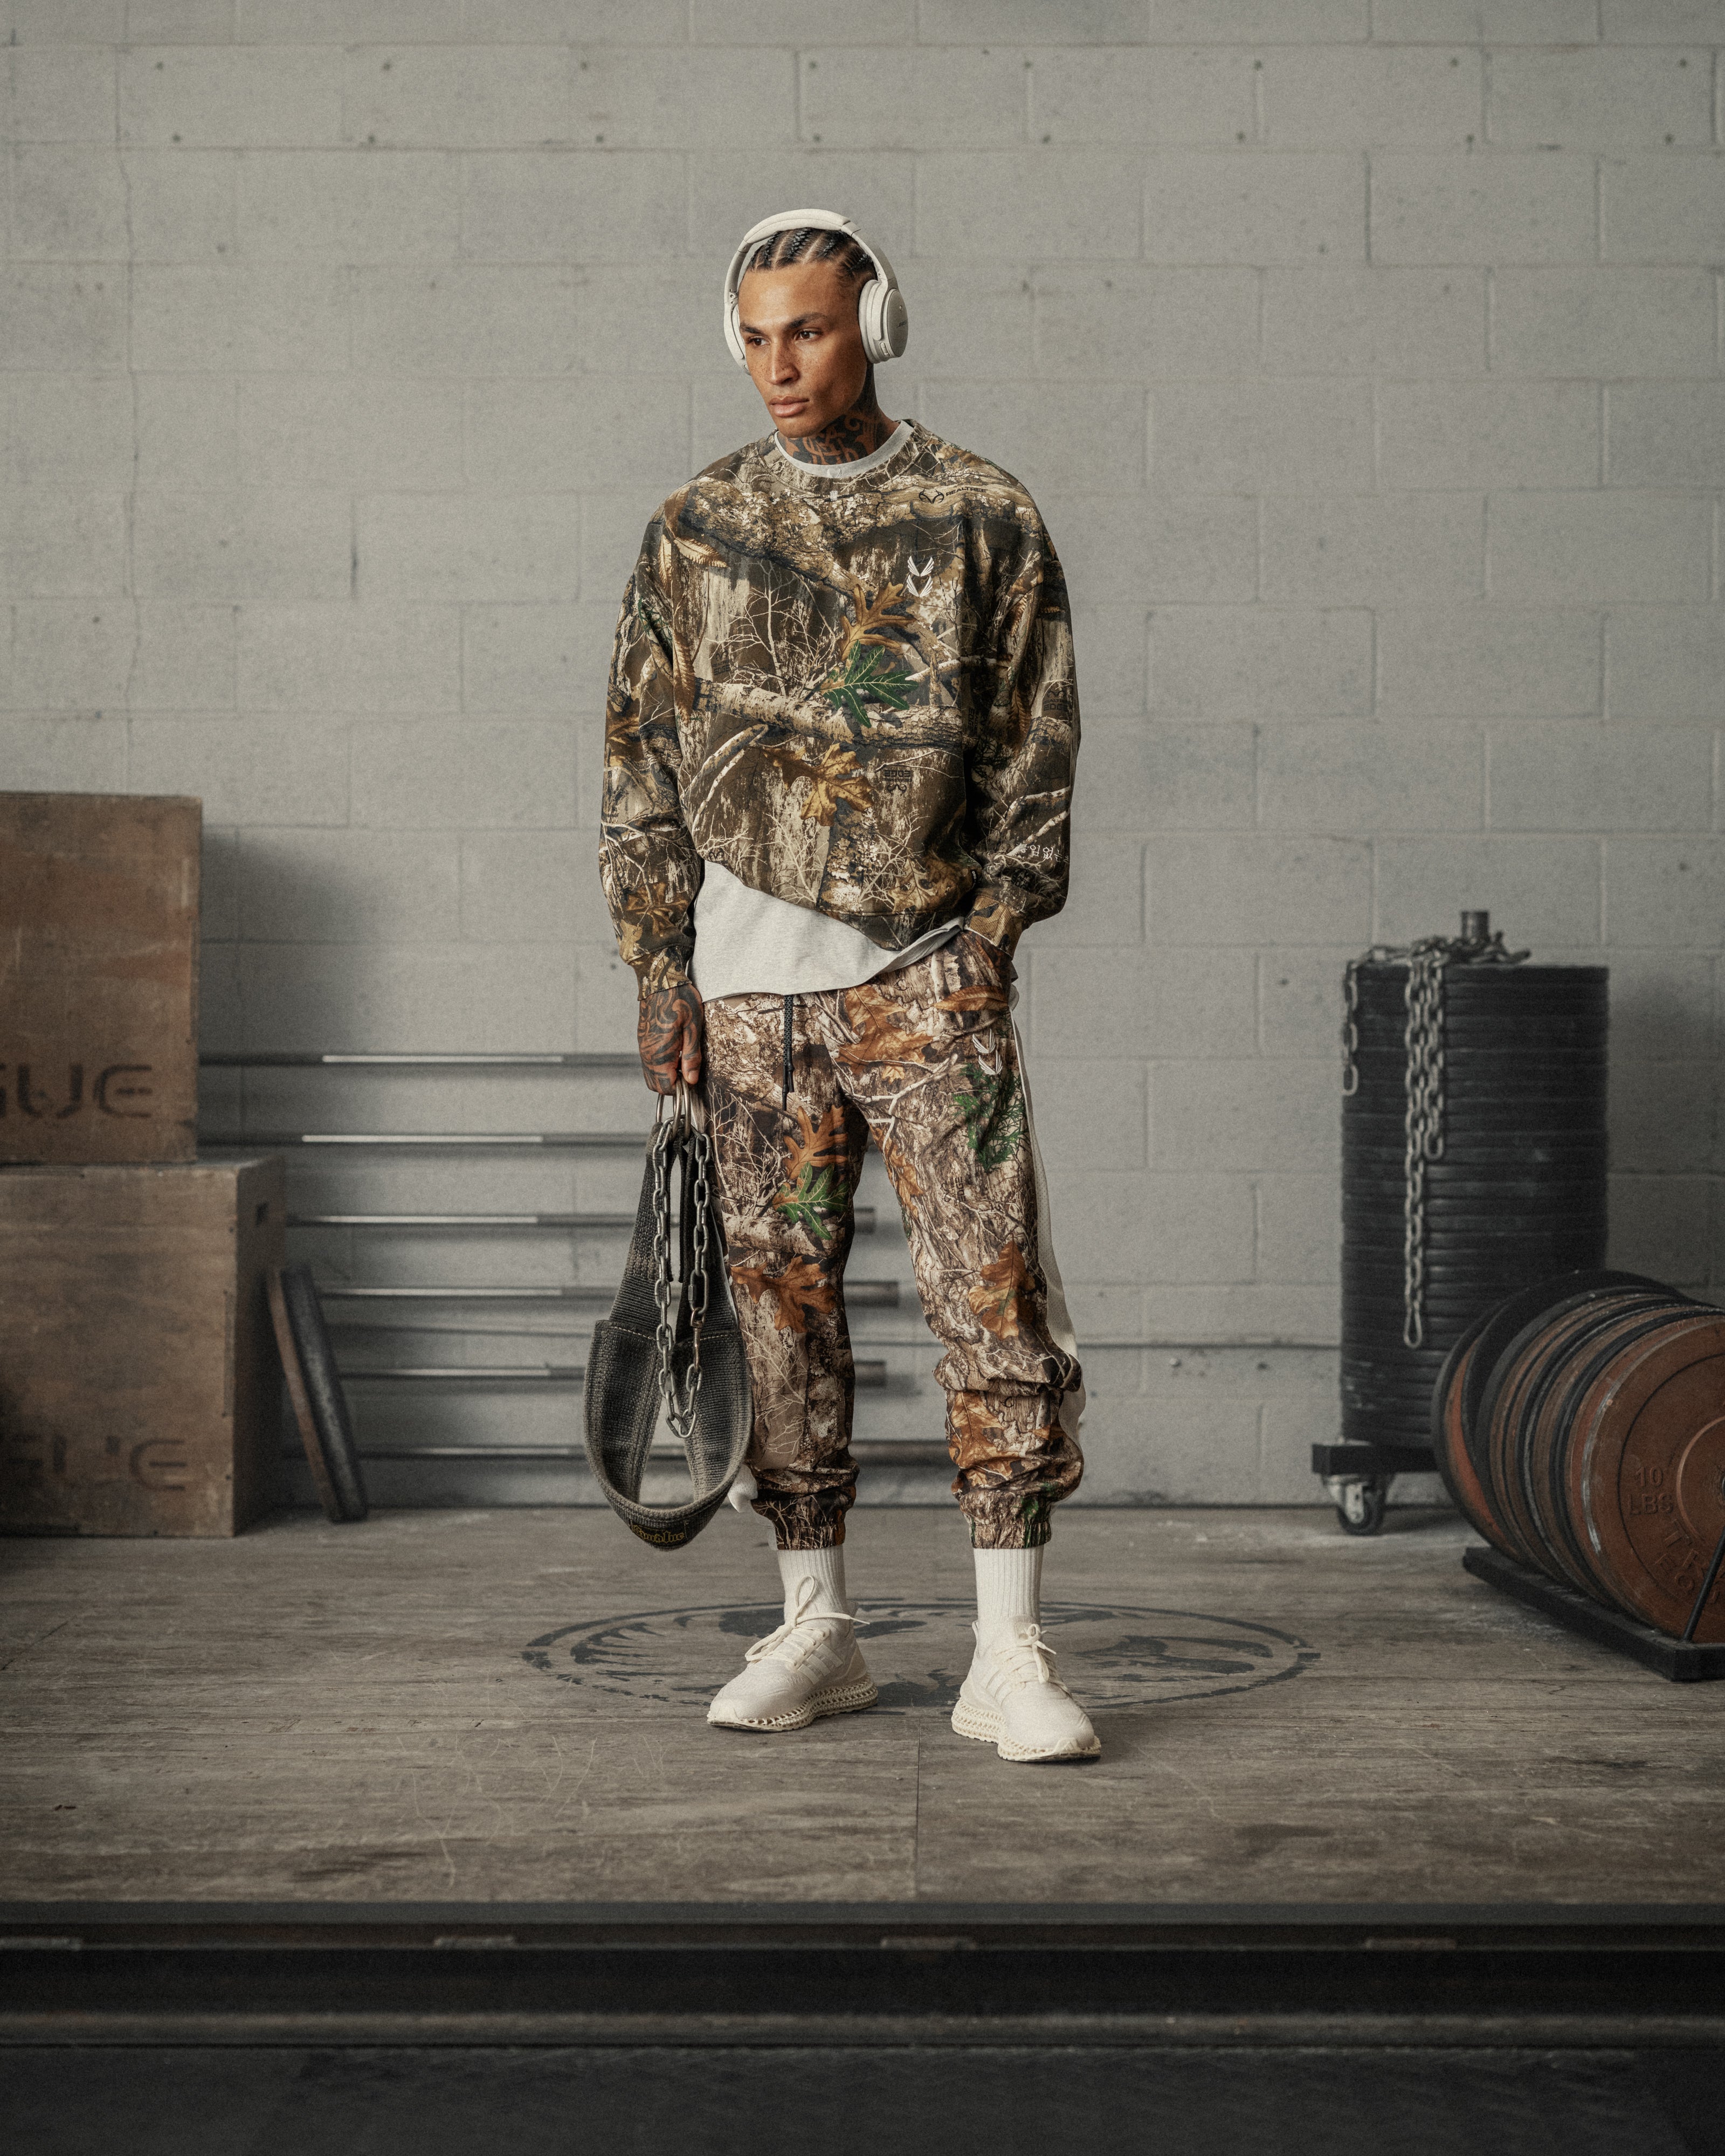 BLACKOVIS TRAILHEAD FULL ZIP HOODIE - Camofire Discount Hunting Gear, Camo  and Clothing